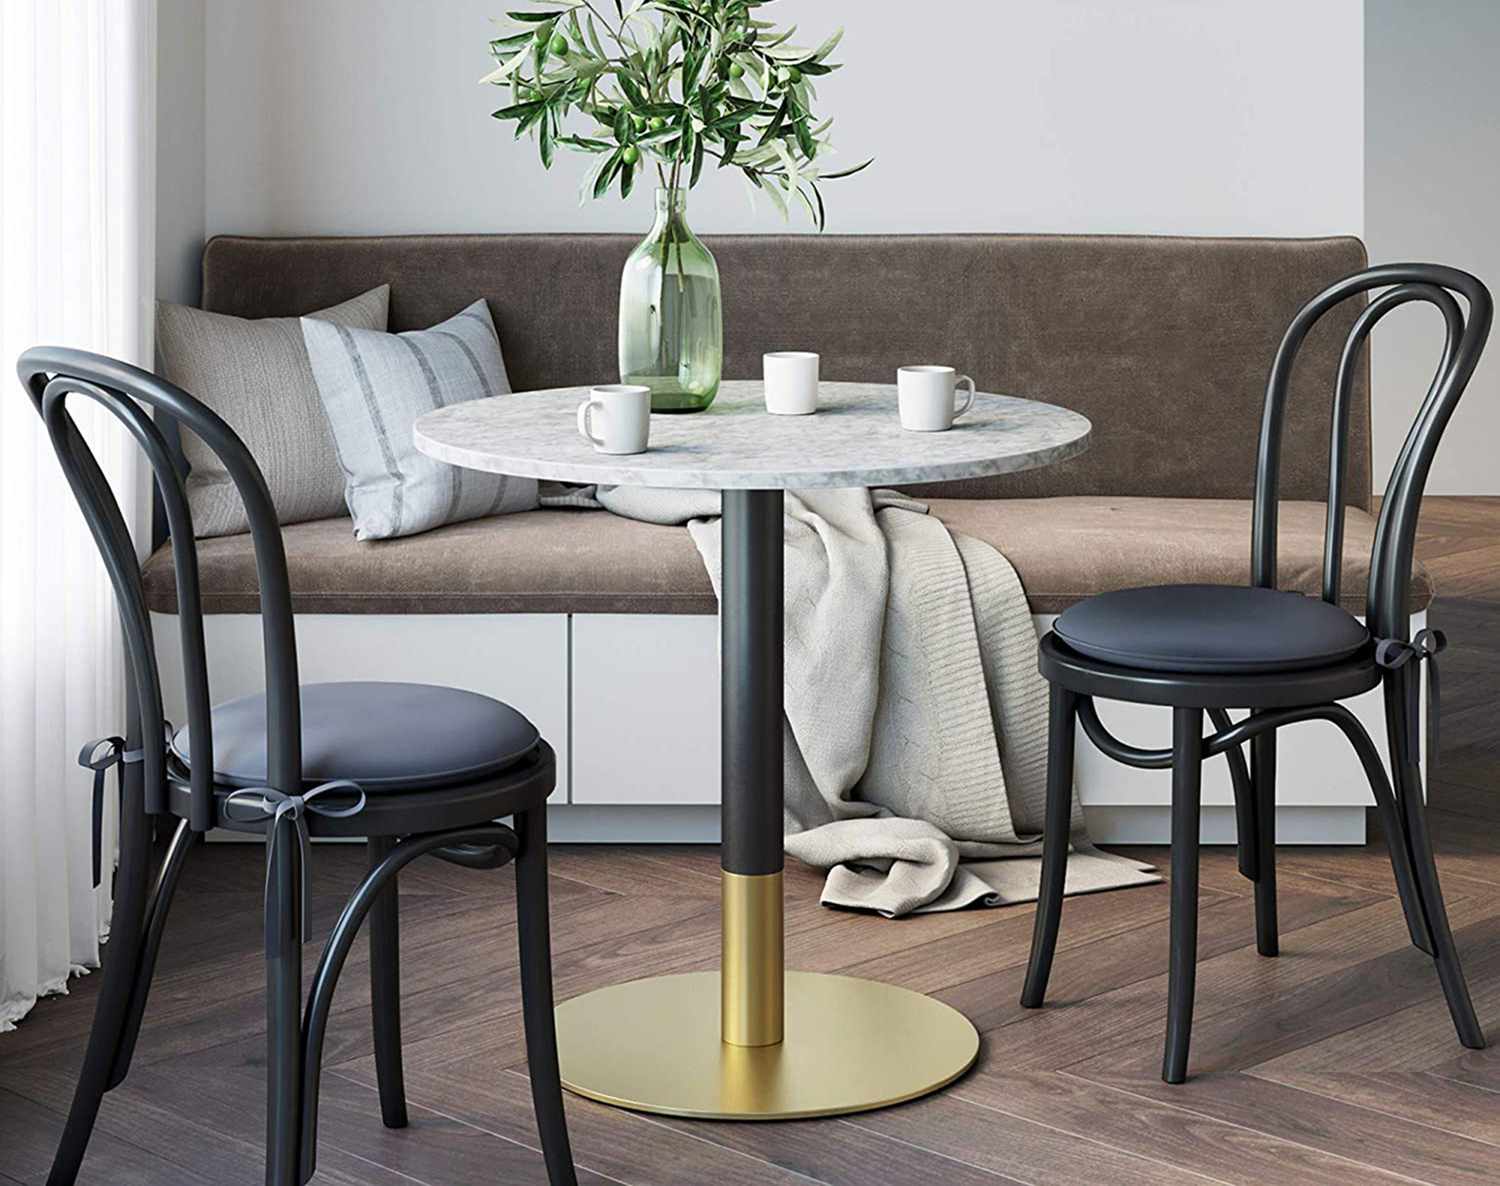 8 Best Dining Tables For Small Spaces, Small Round Breakfast Table And Chairs